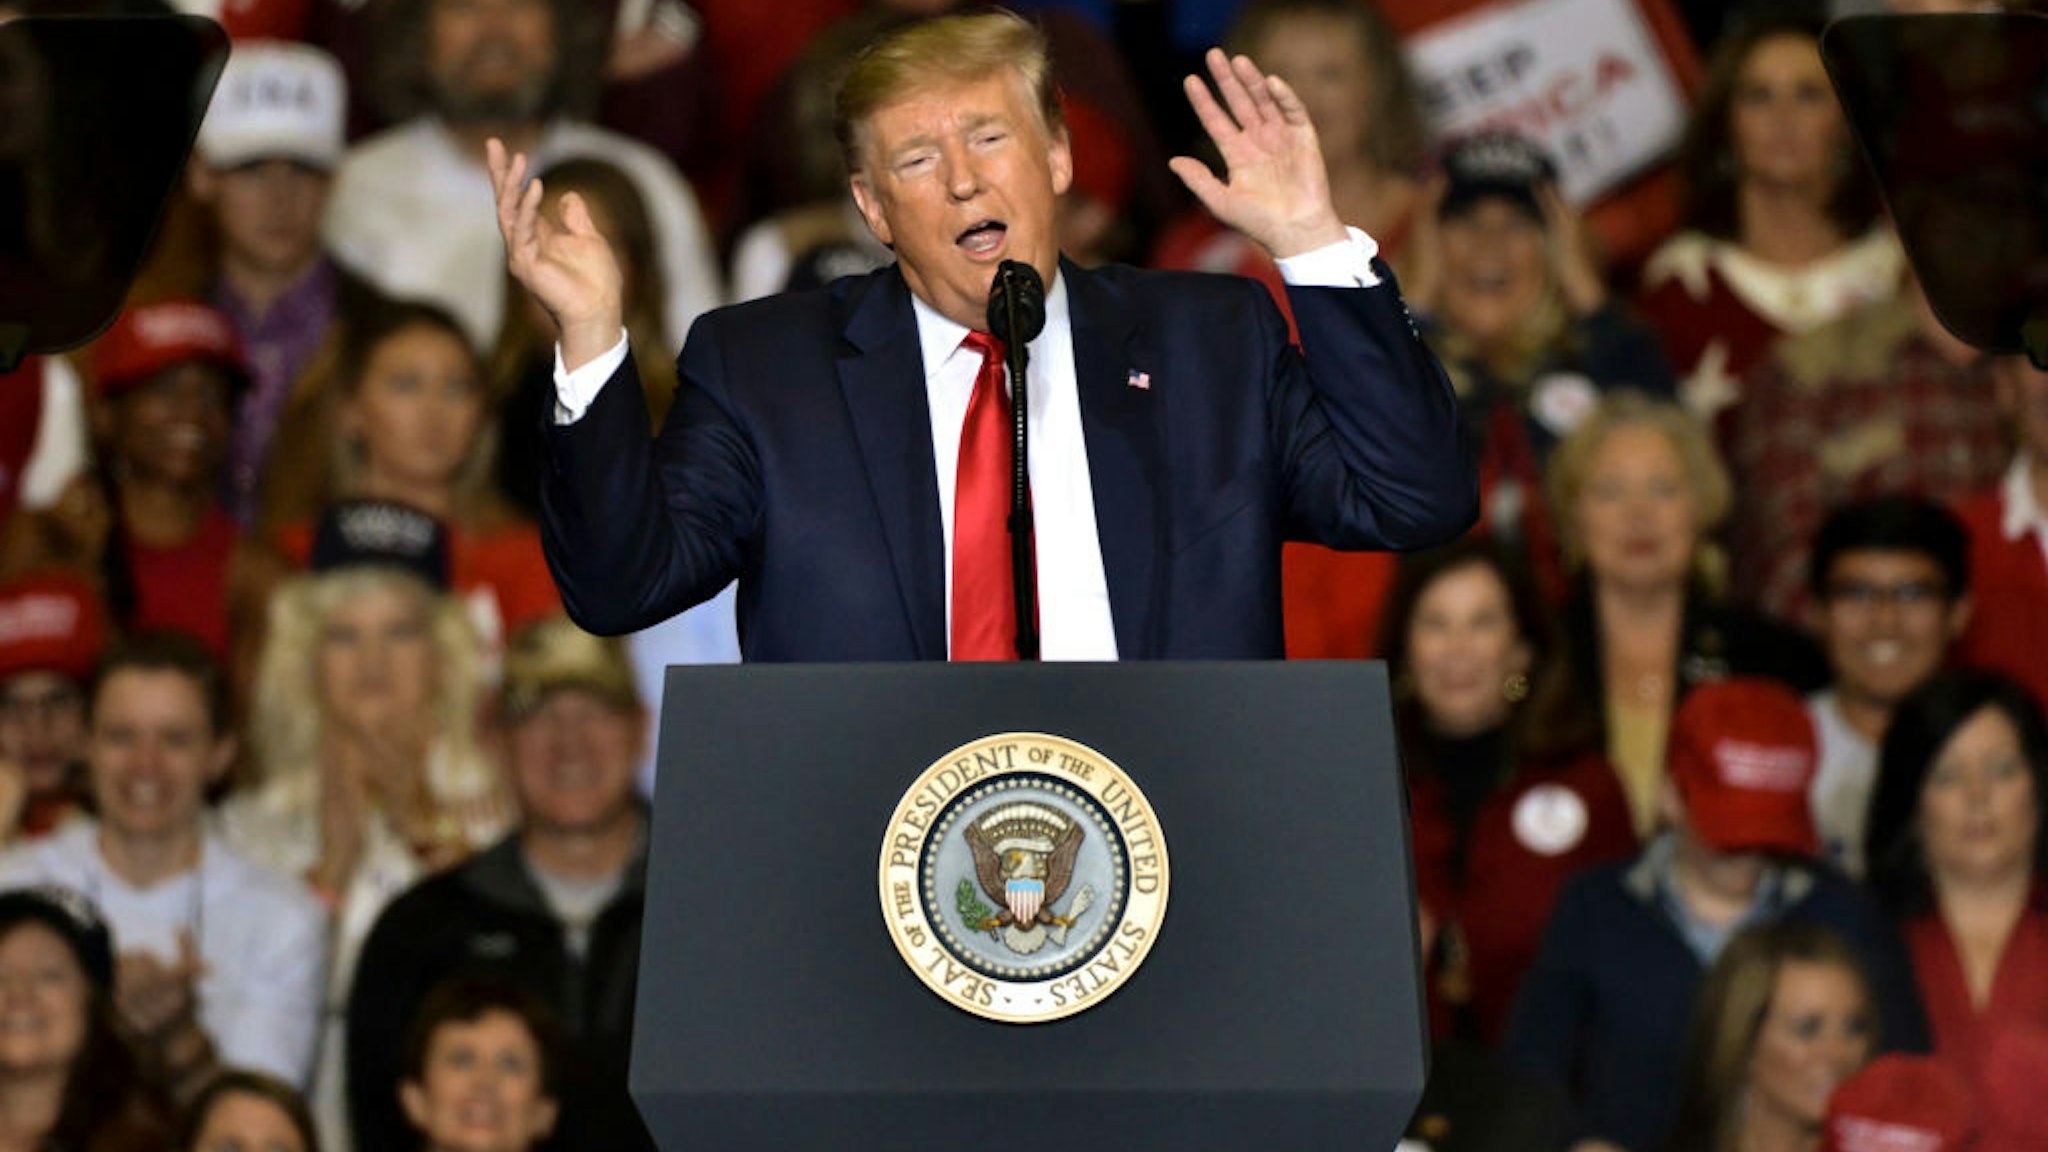 President Donald Trump mocks Beto O'Rourke during a "Keep America Great" campaign rally